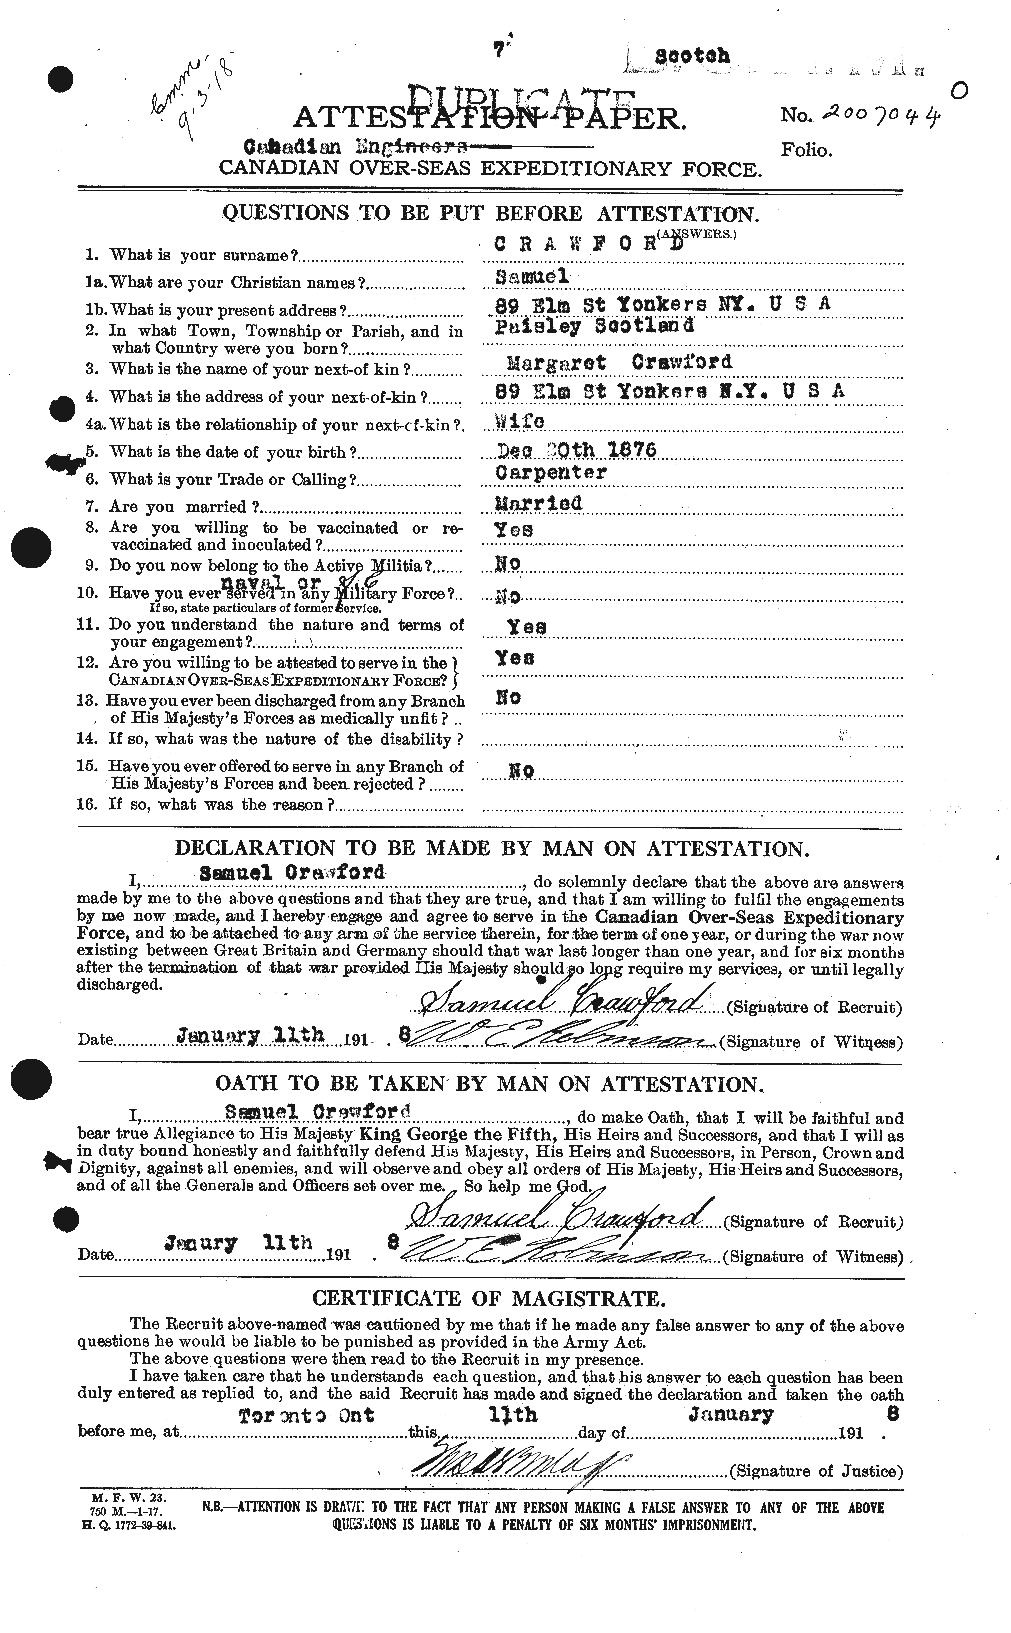 Personnel Records of the First World War - CEF 061377a